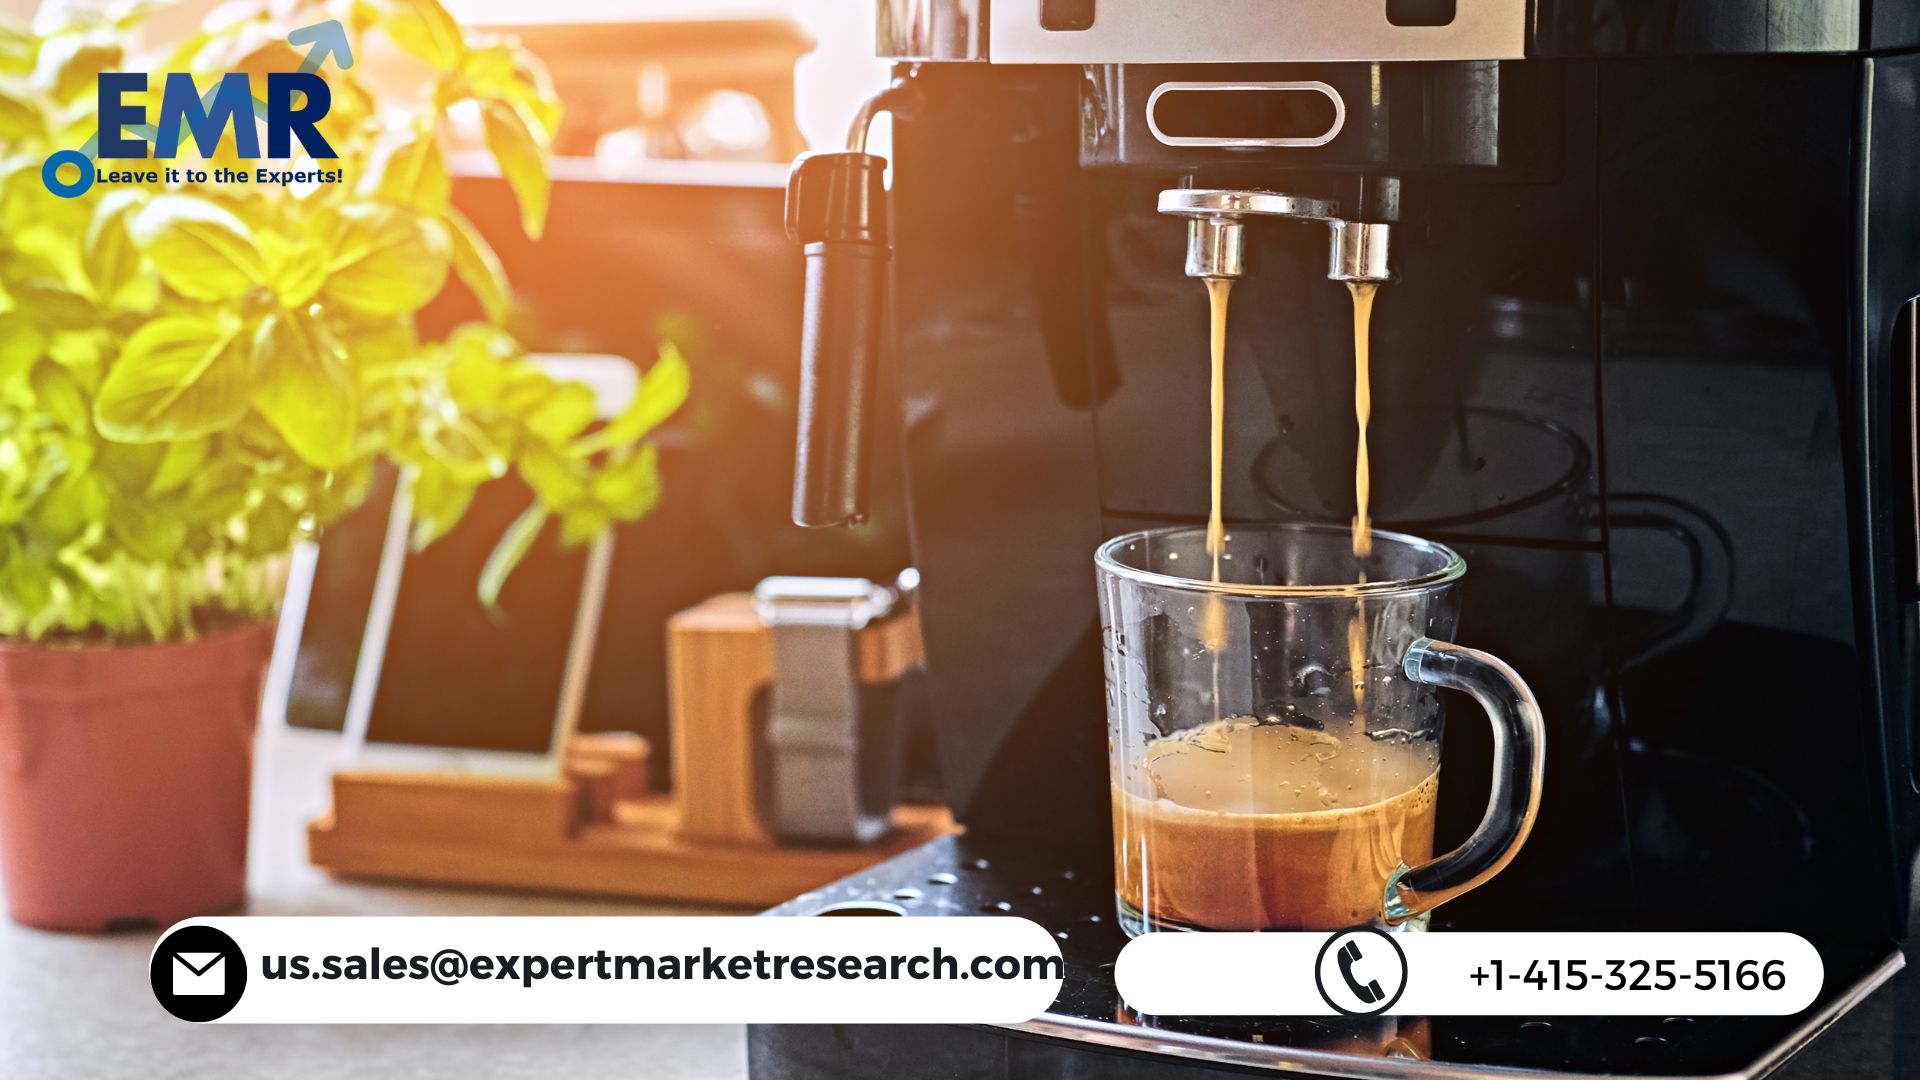 Global Coffee Machines Market Size To Grow At A CAGR Of 4.1% In The Forecast Period Of 2022-2027 | EMR Inc.